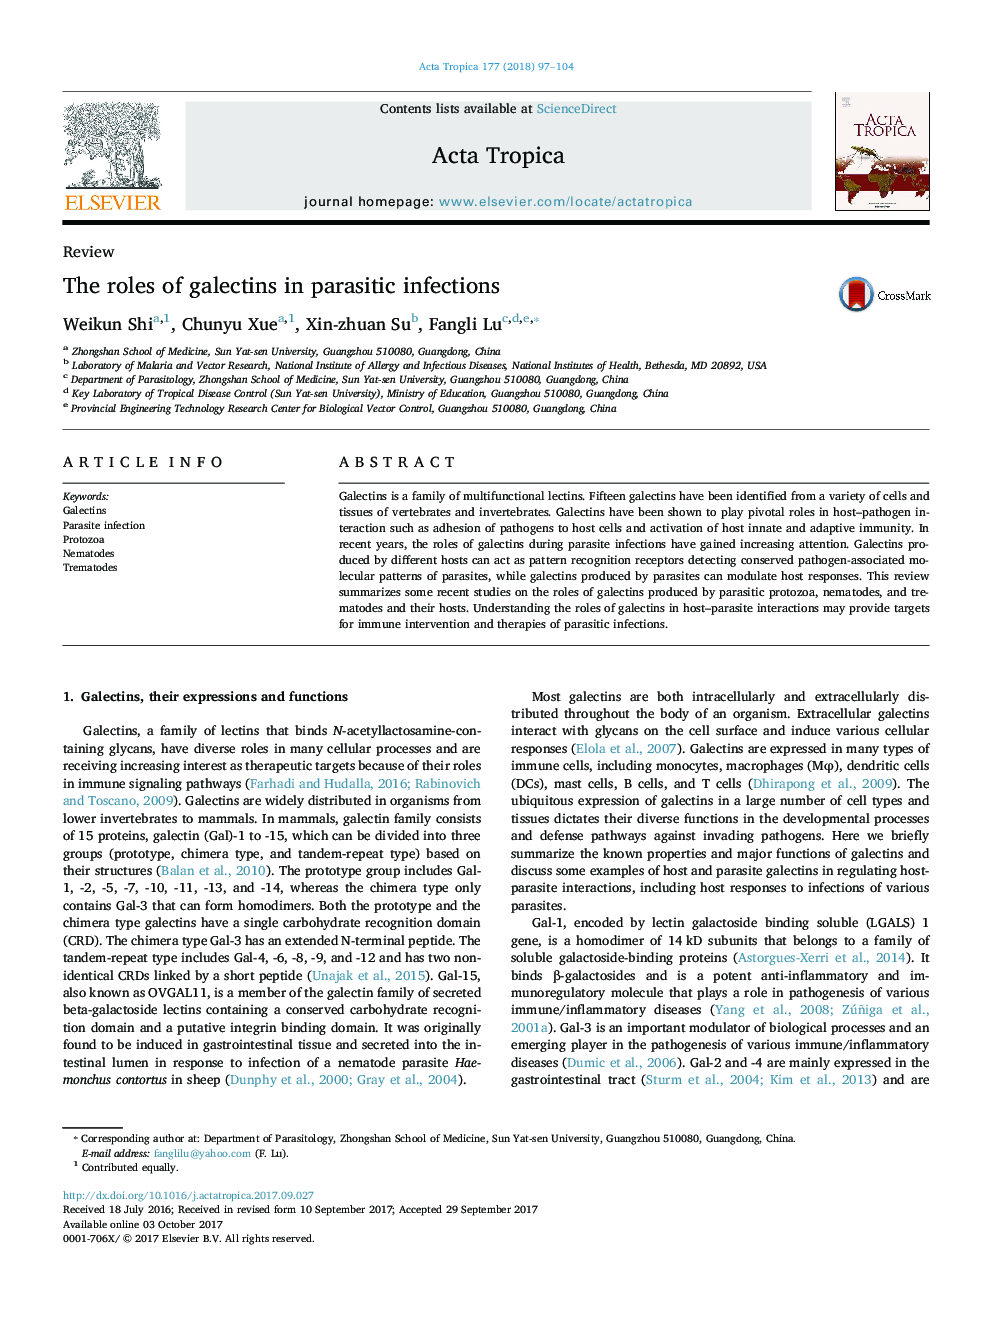 The roles of galectins in parasitic infections